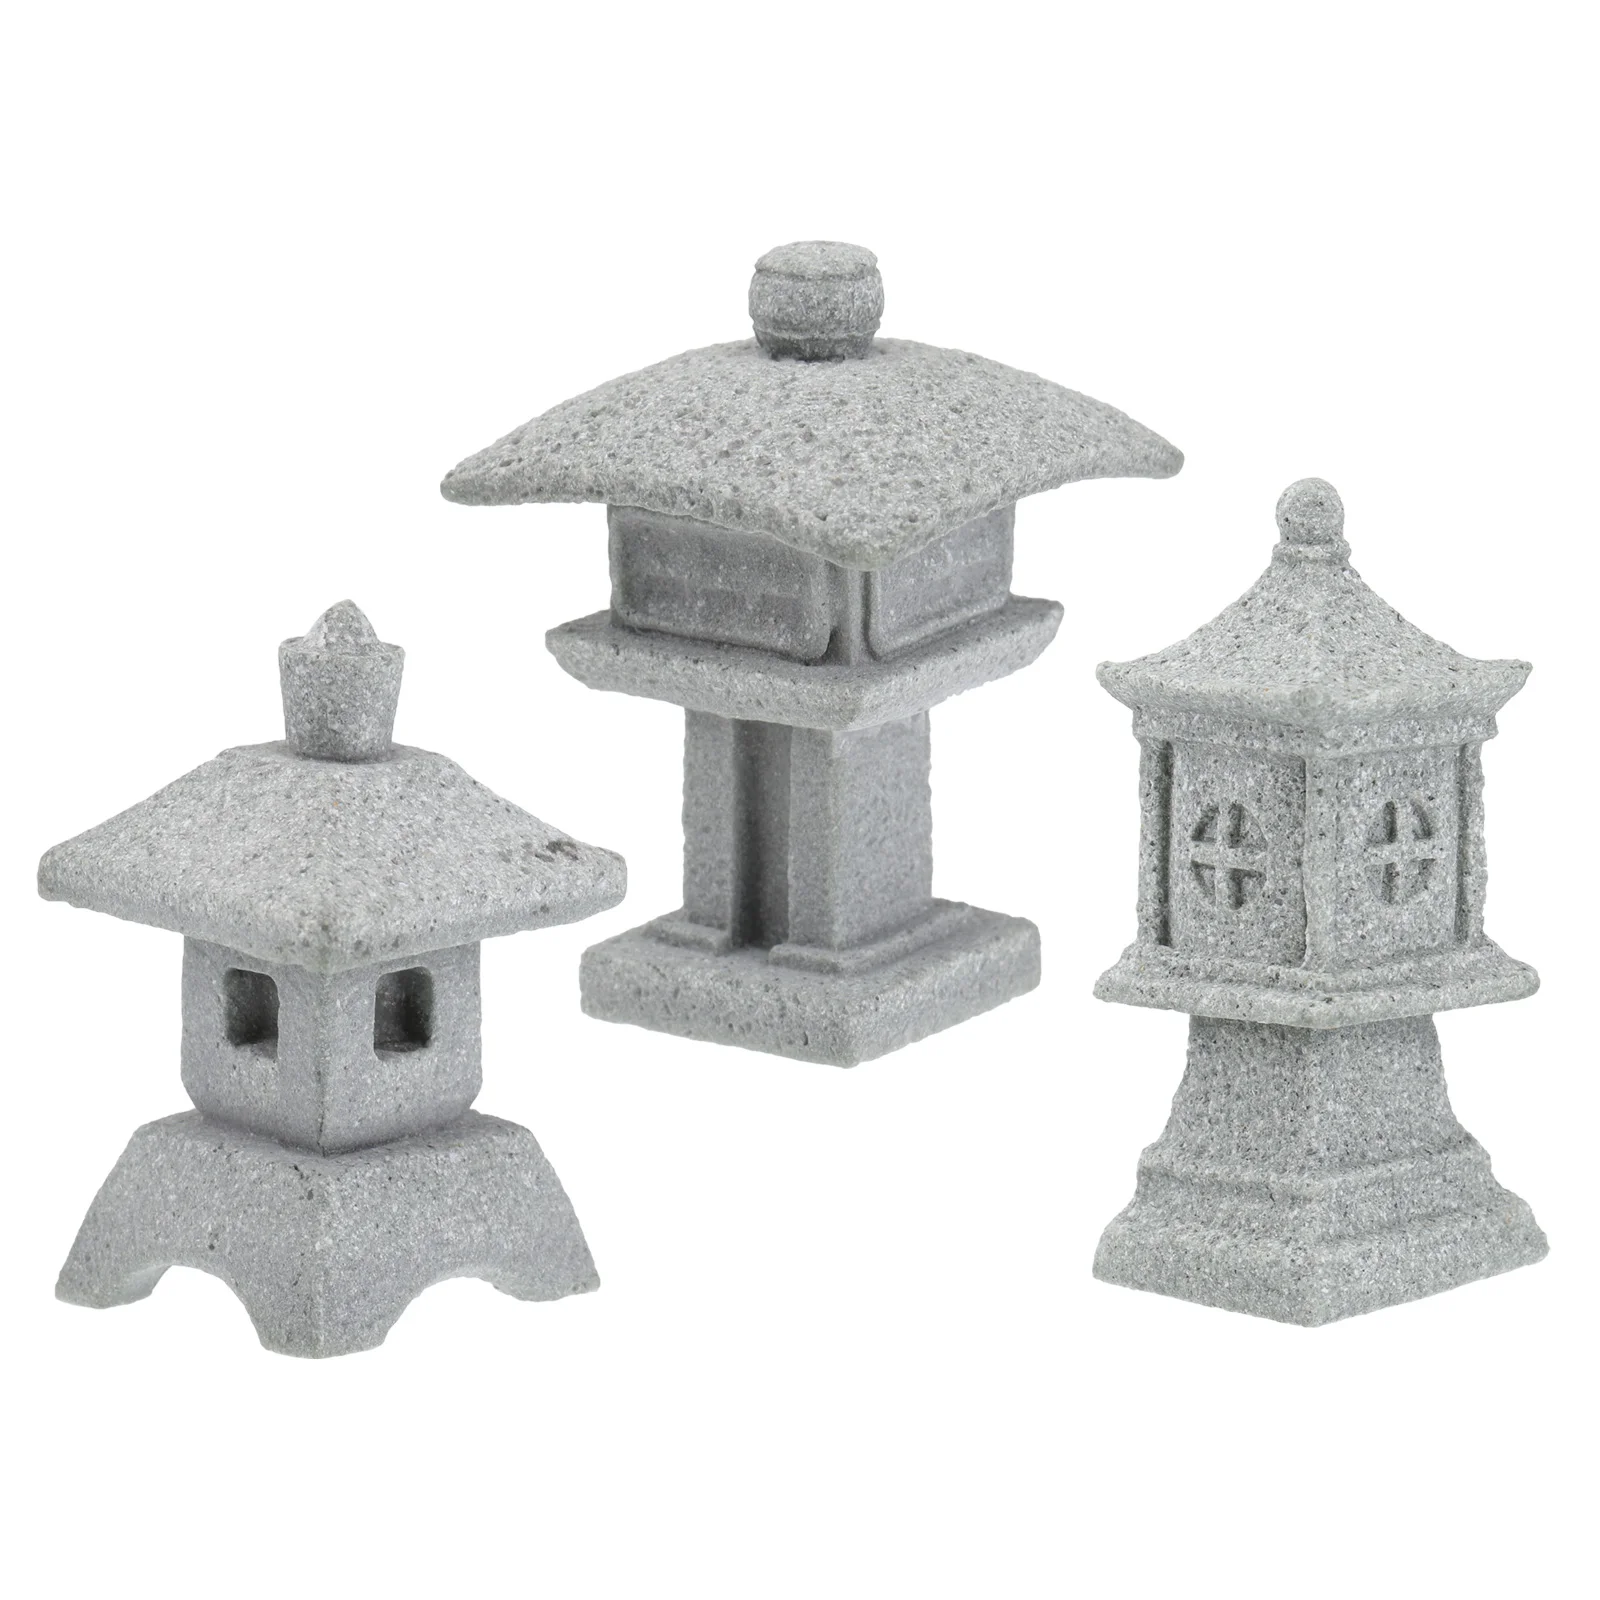 

3 Pcs Bonsai Accessories Pagoda Outdoor Fairy Figurines Lawn Ornaments Garden House Home Creek Statue Chinese Tower Zen